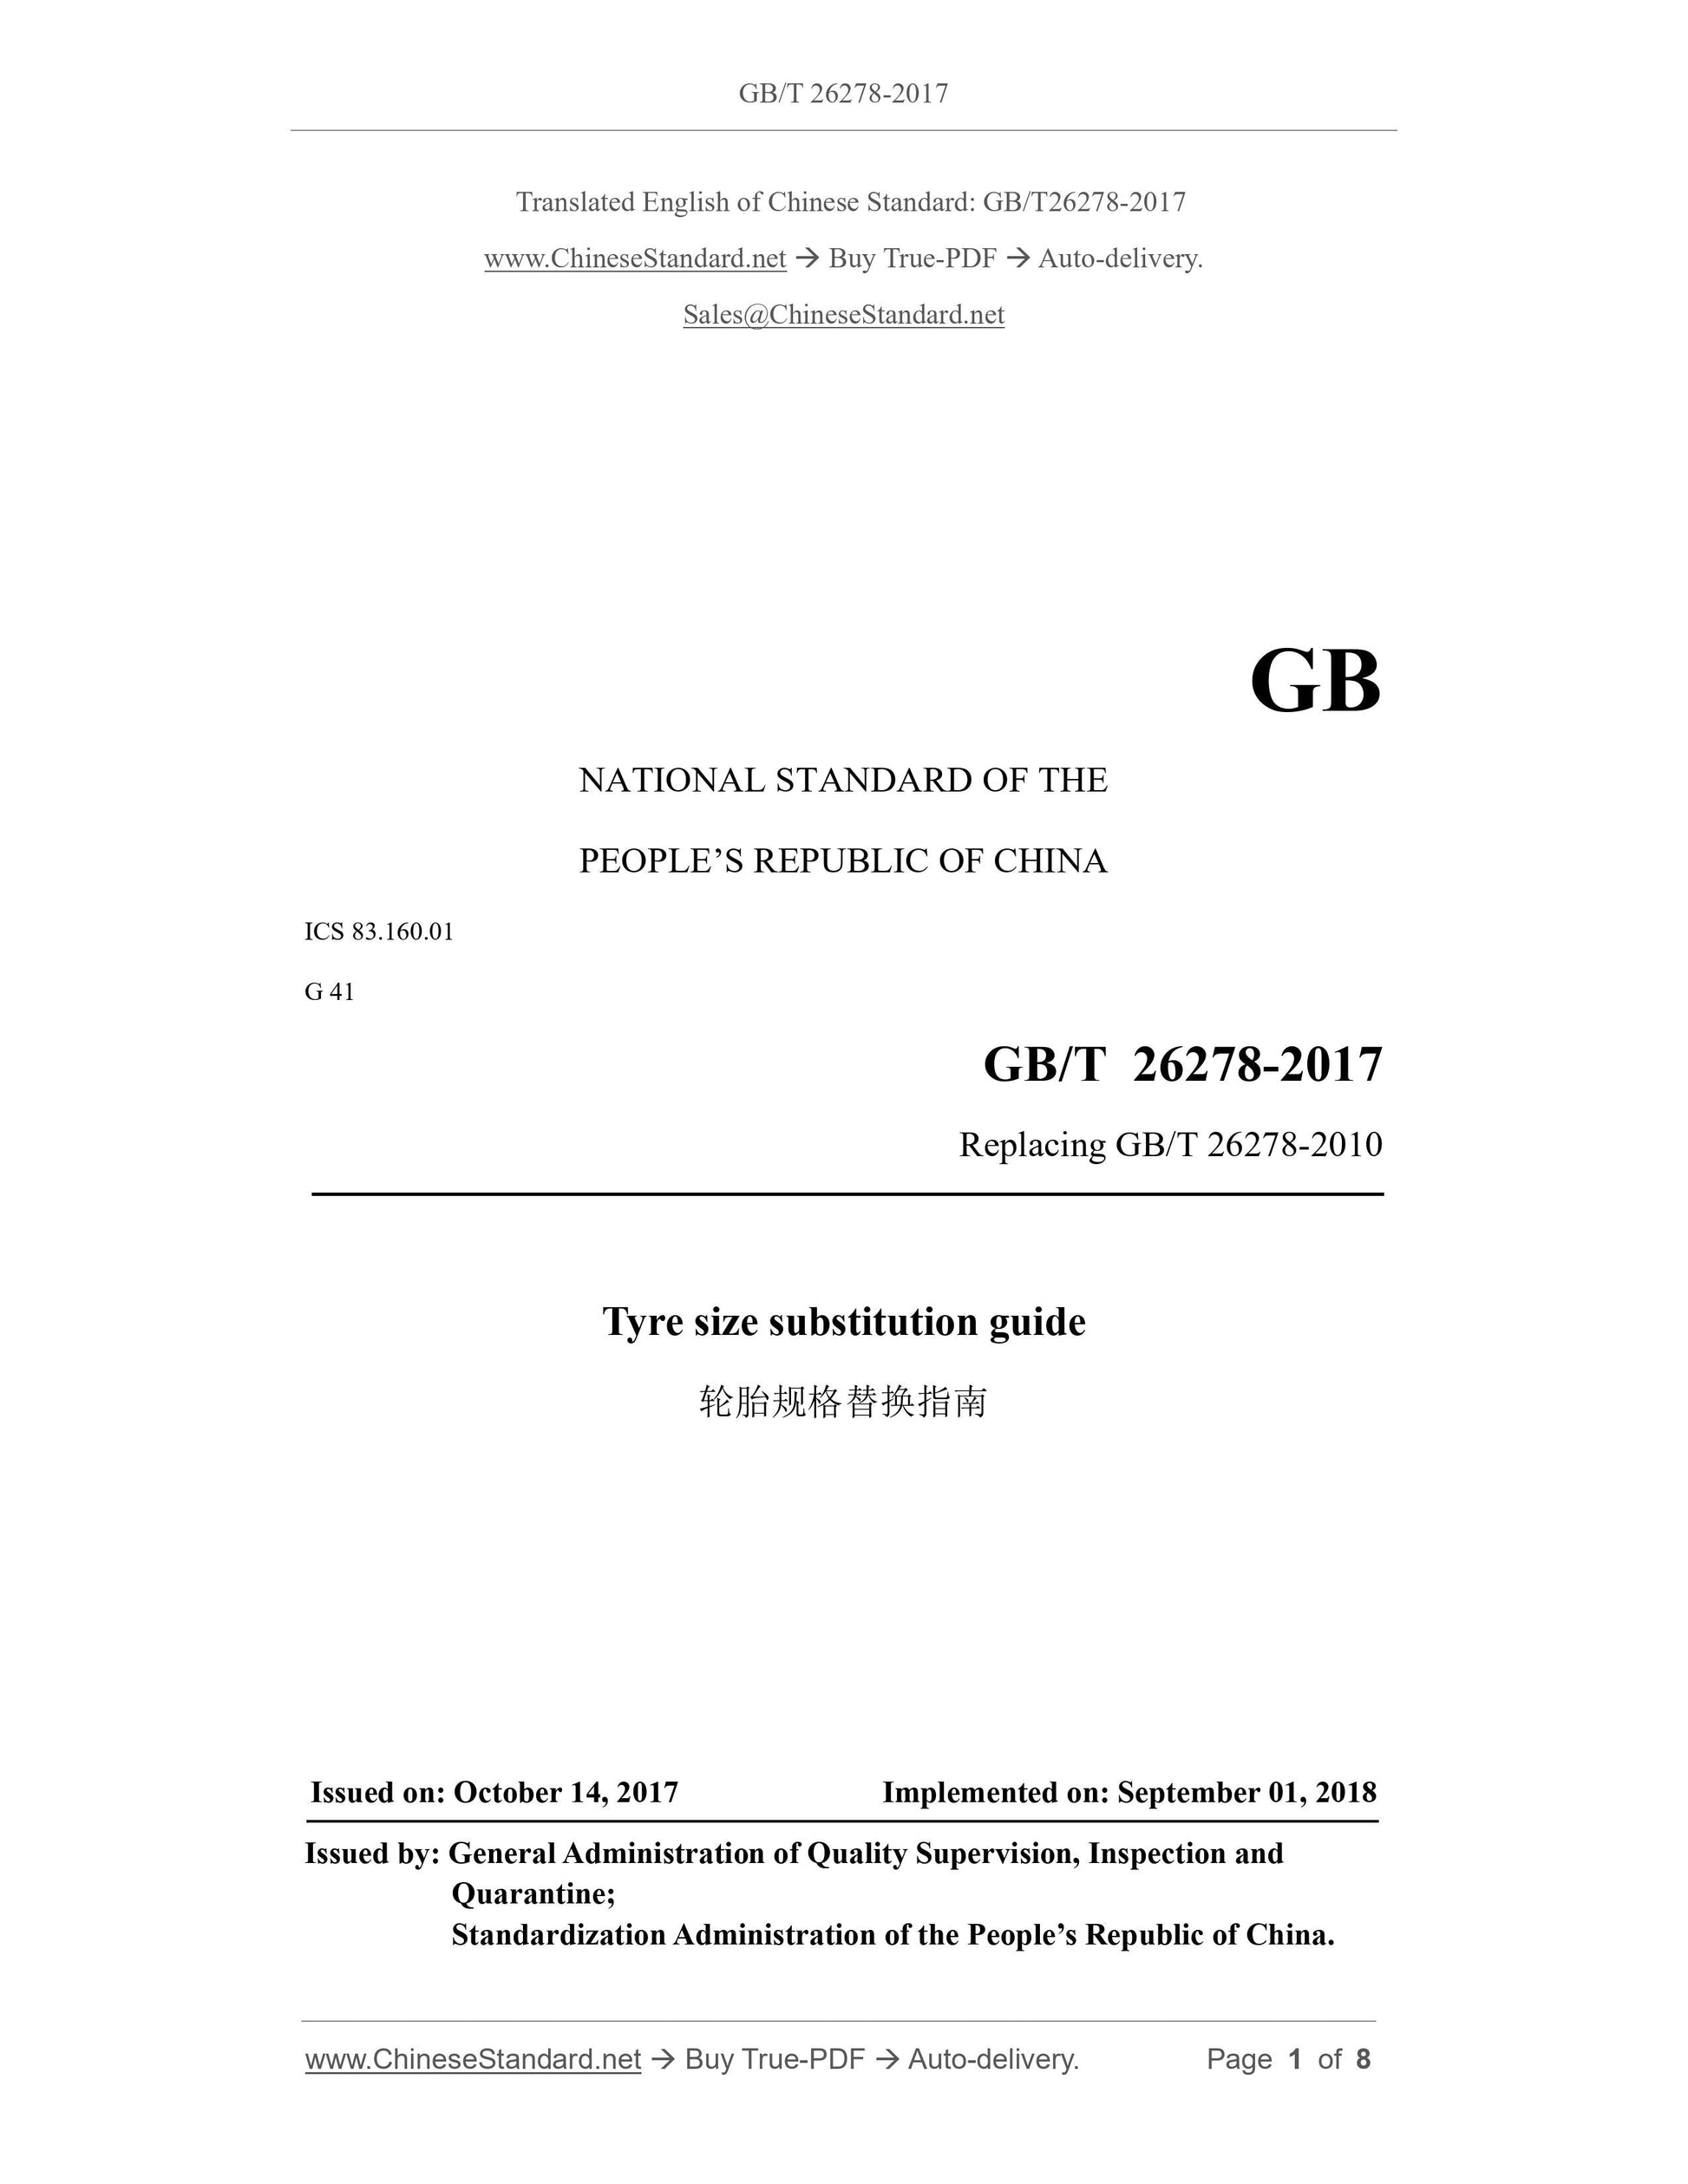 GB/T 26278-2017 Page 1